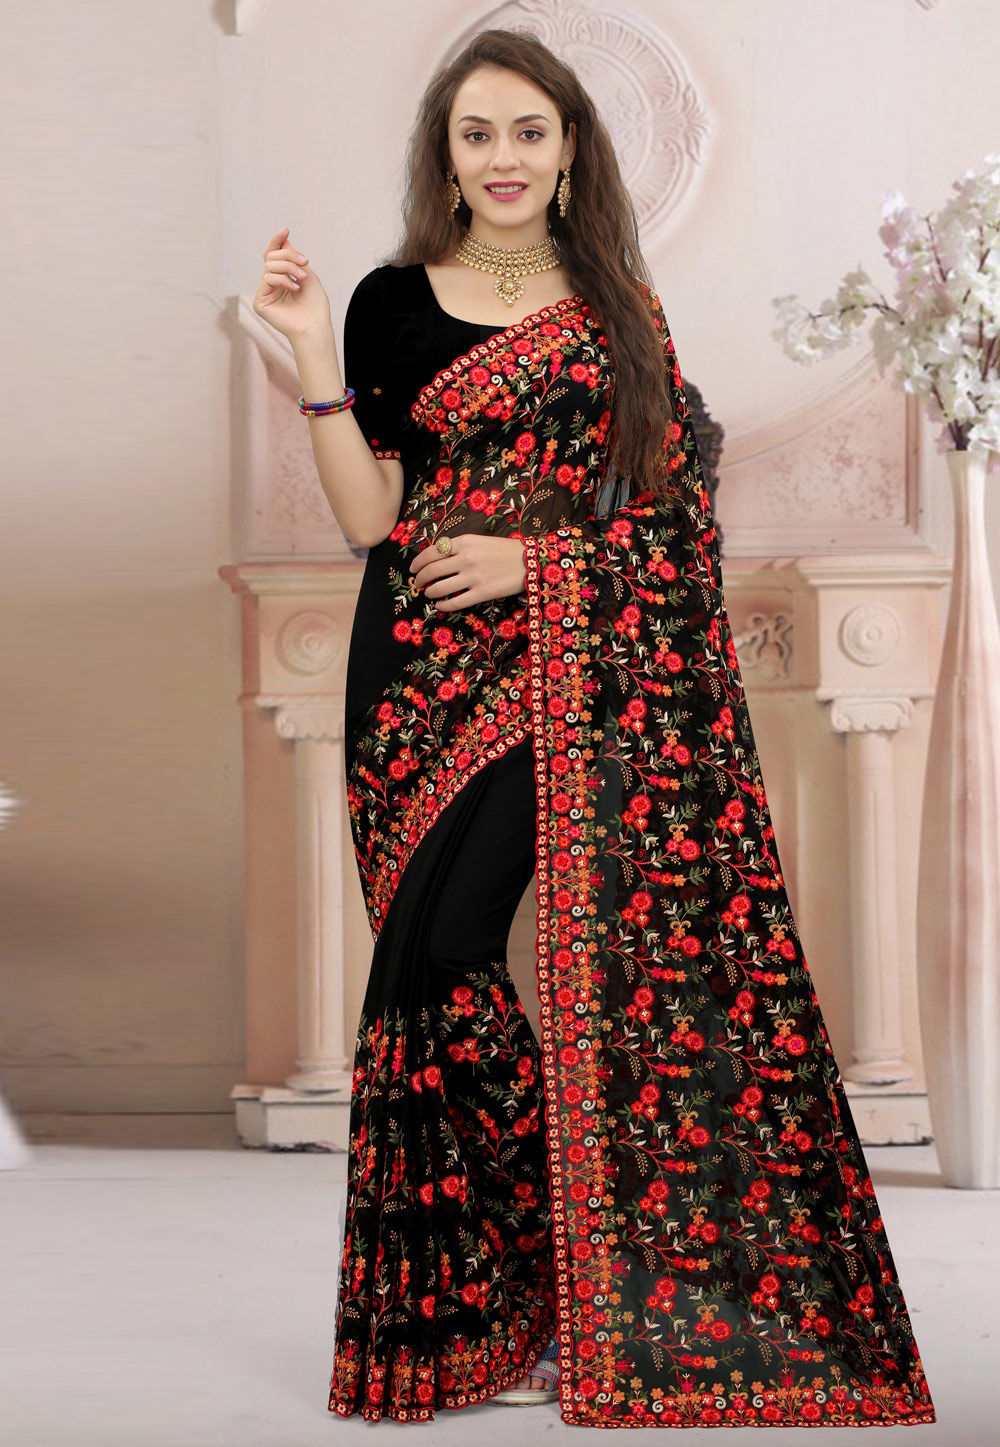 seymore Print Royal Black and Red Georgette Satin Patta Saree -  (SHILA-3628) in Allahabad at best price by Sukhbasi Lal Mishri Lal Vinimay  Pvt Ltd - Justdial